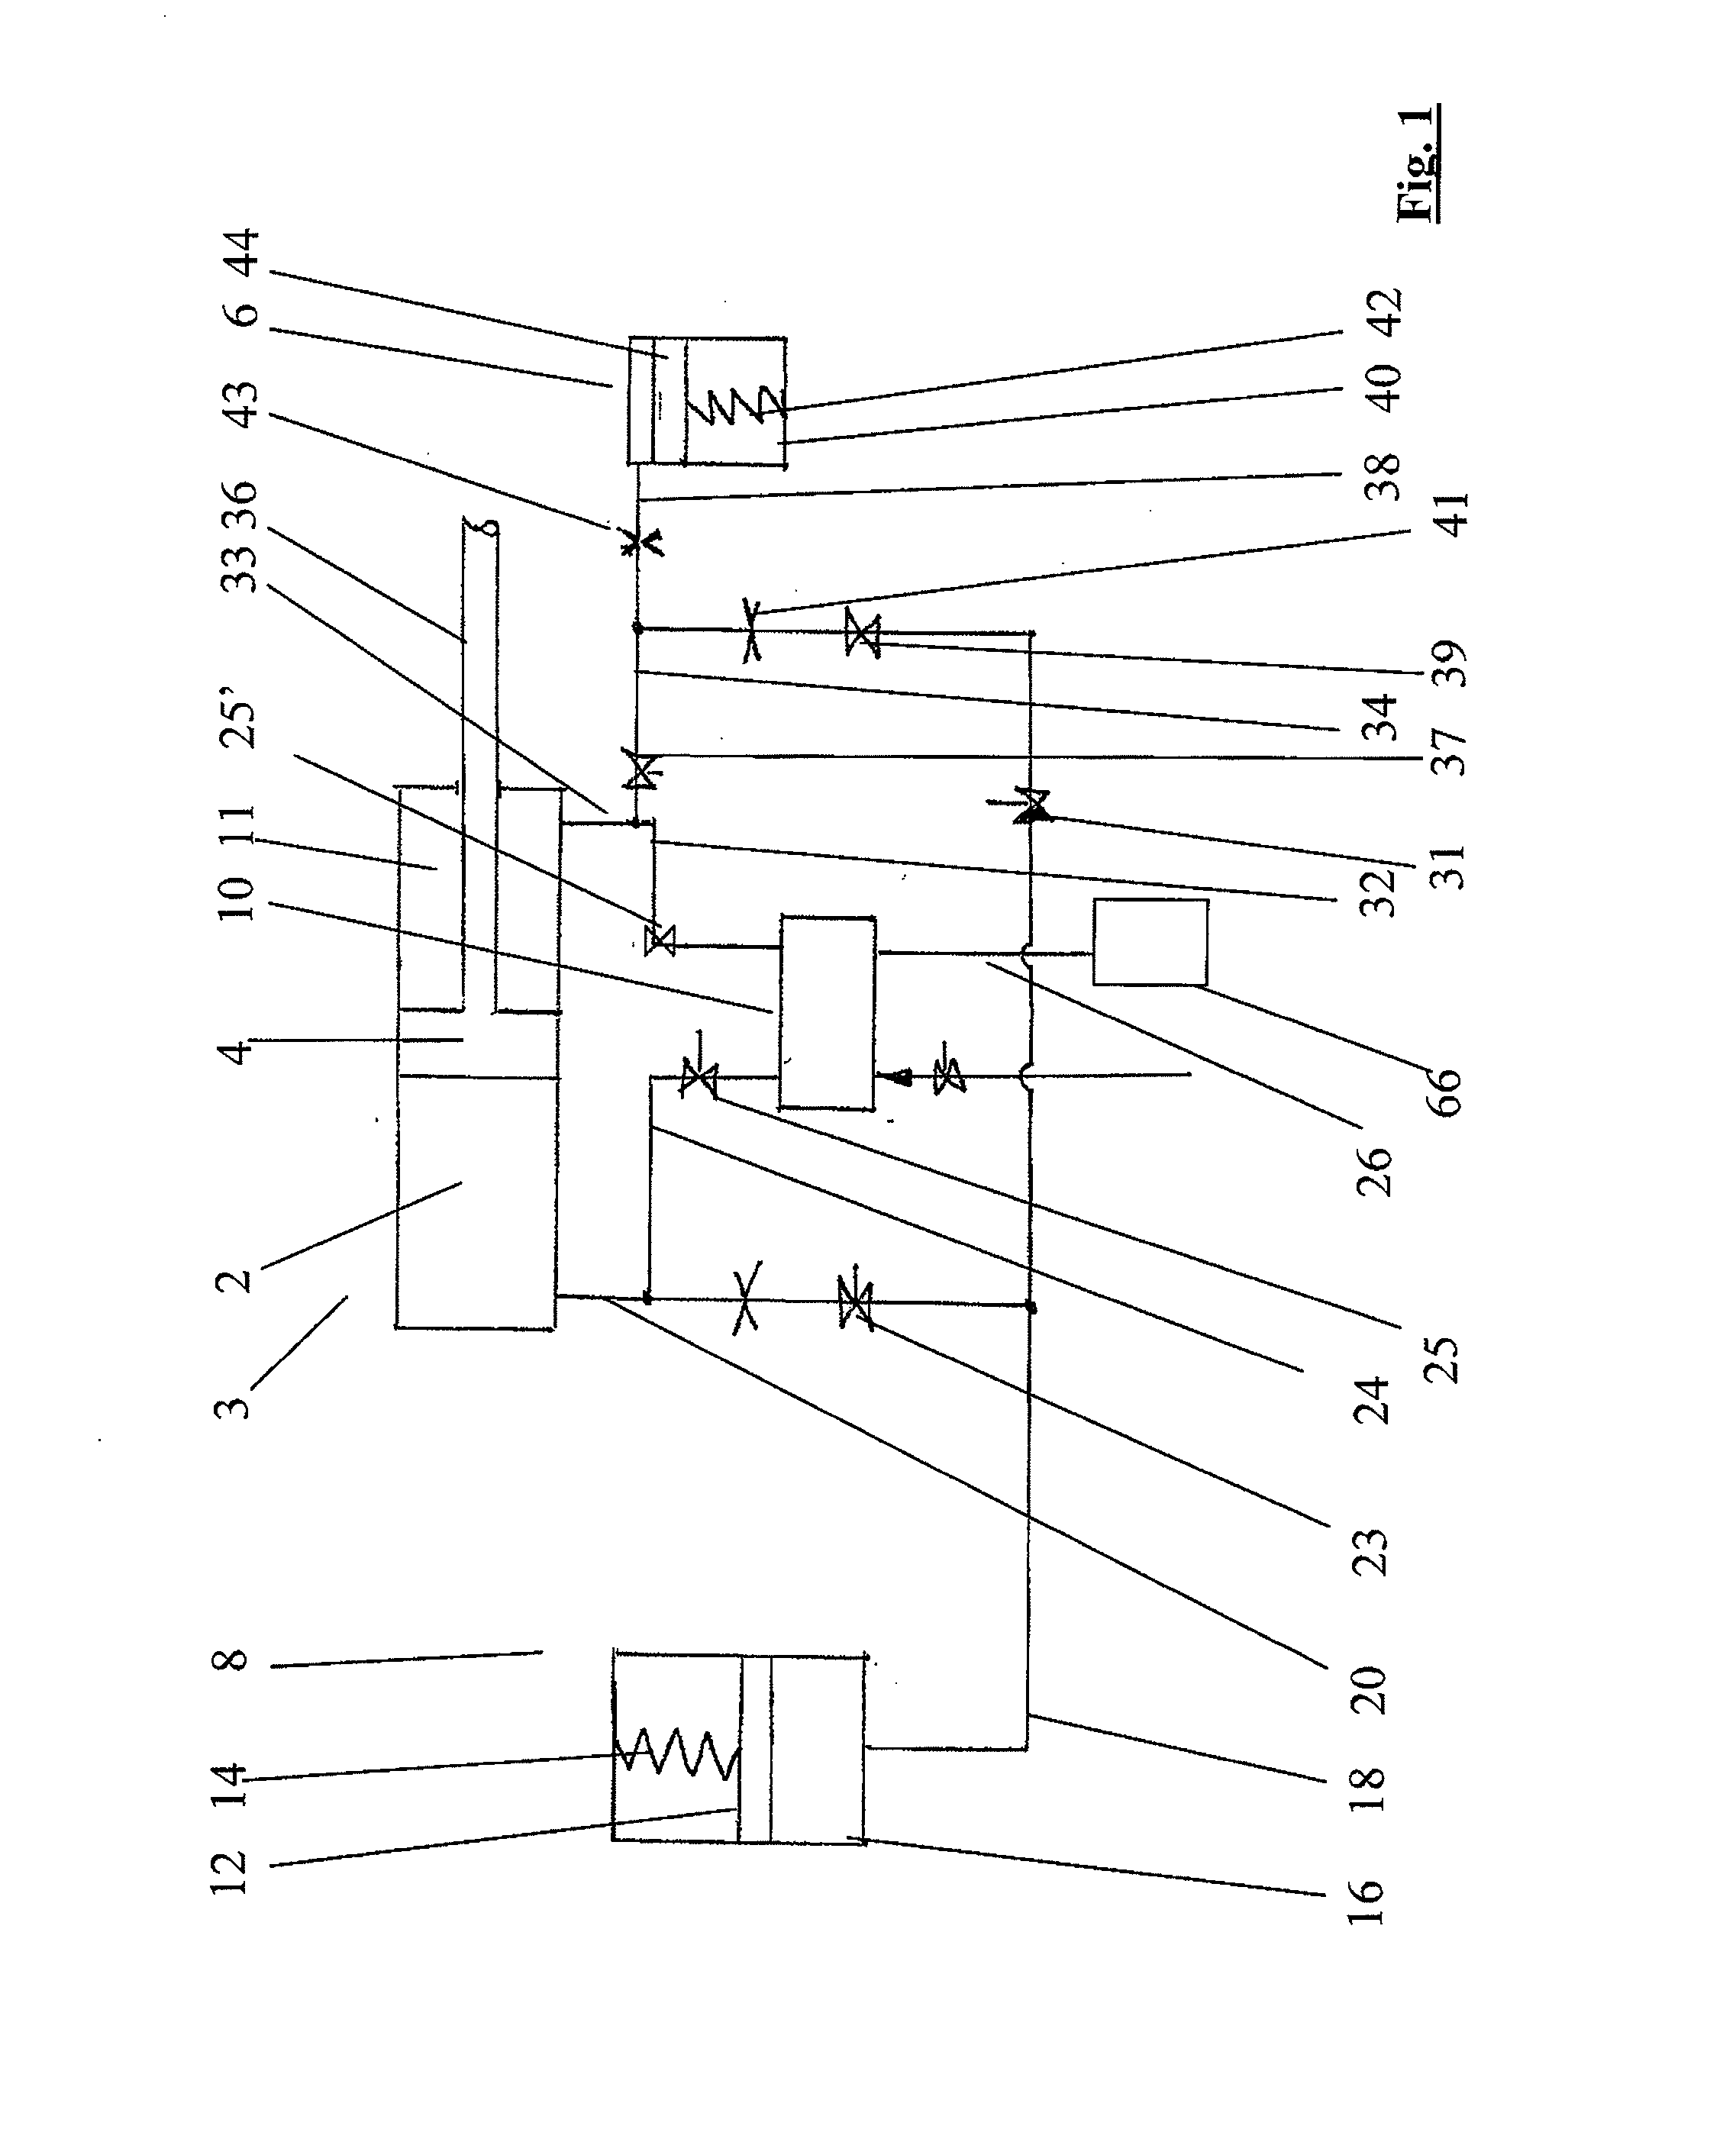 System for rotating a wind turbine blade